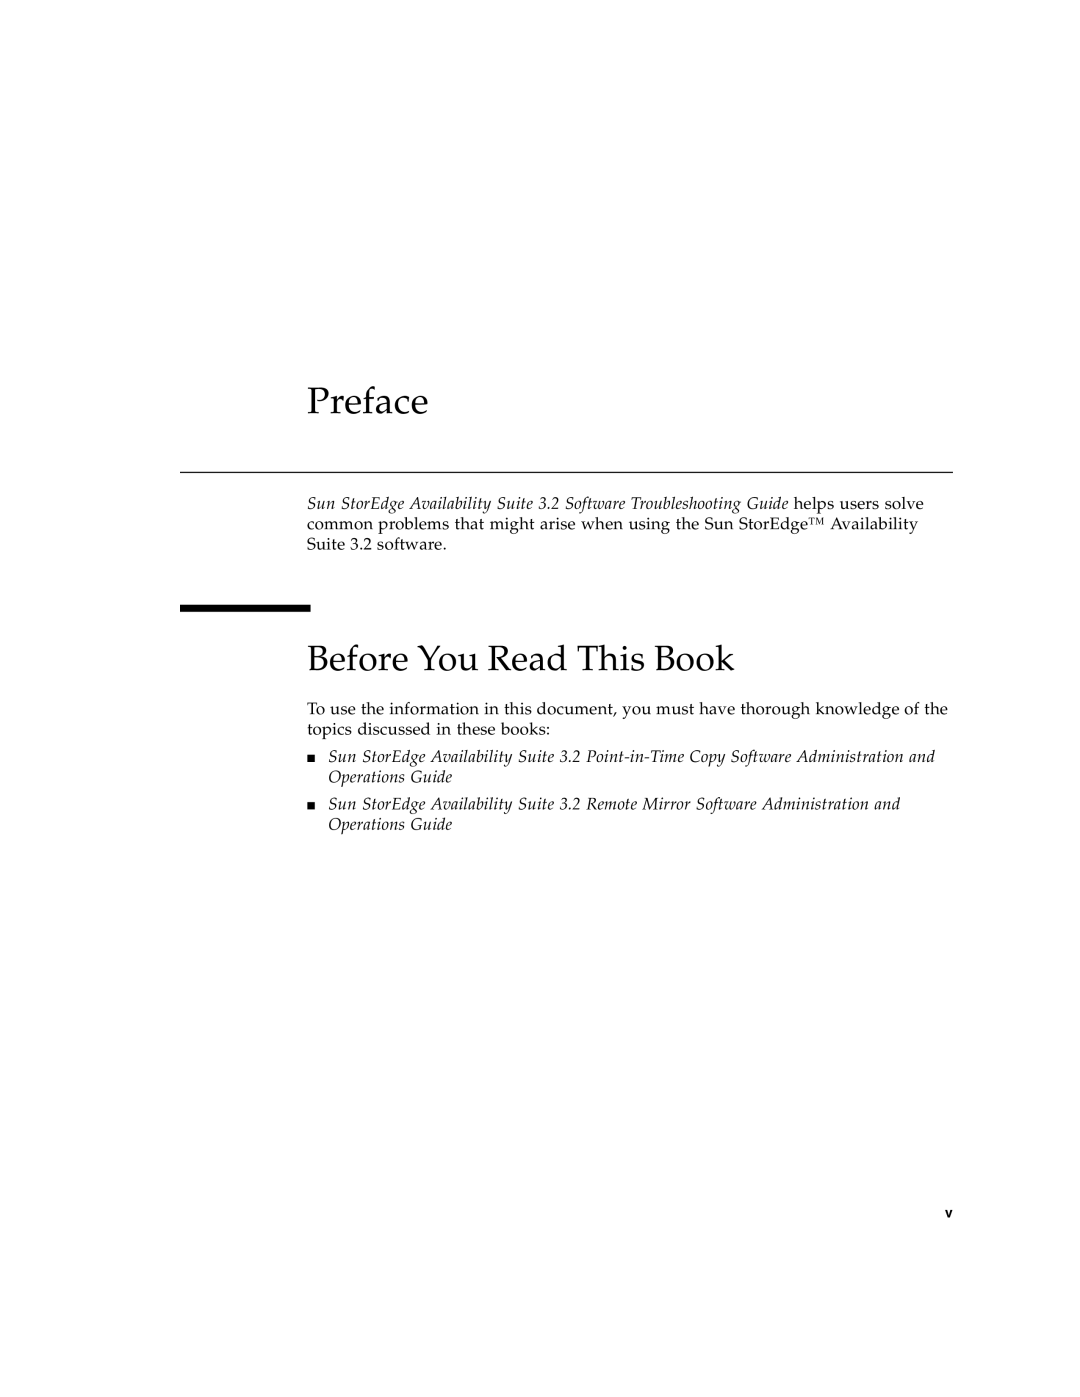 Sun Microsystems 3.2 manual Preface, Before You Read This Book 